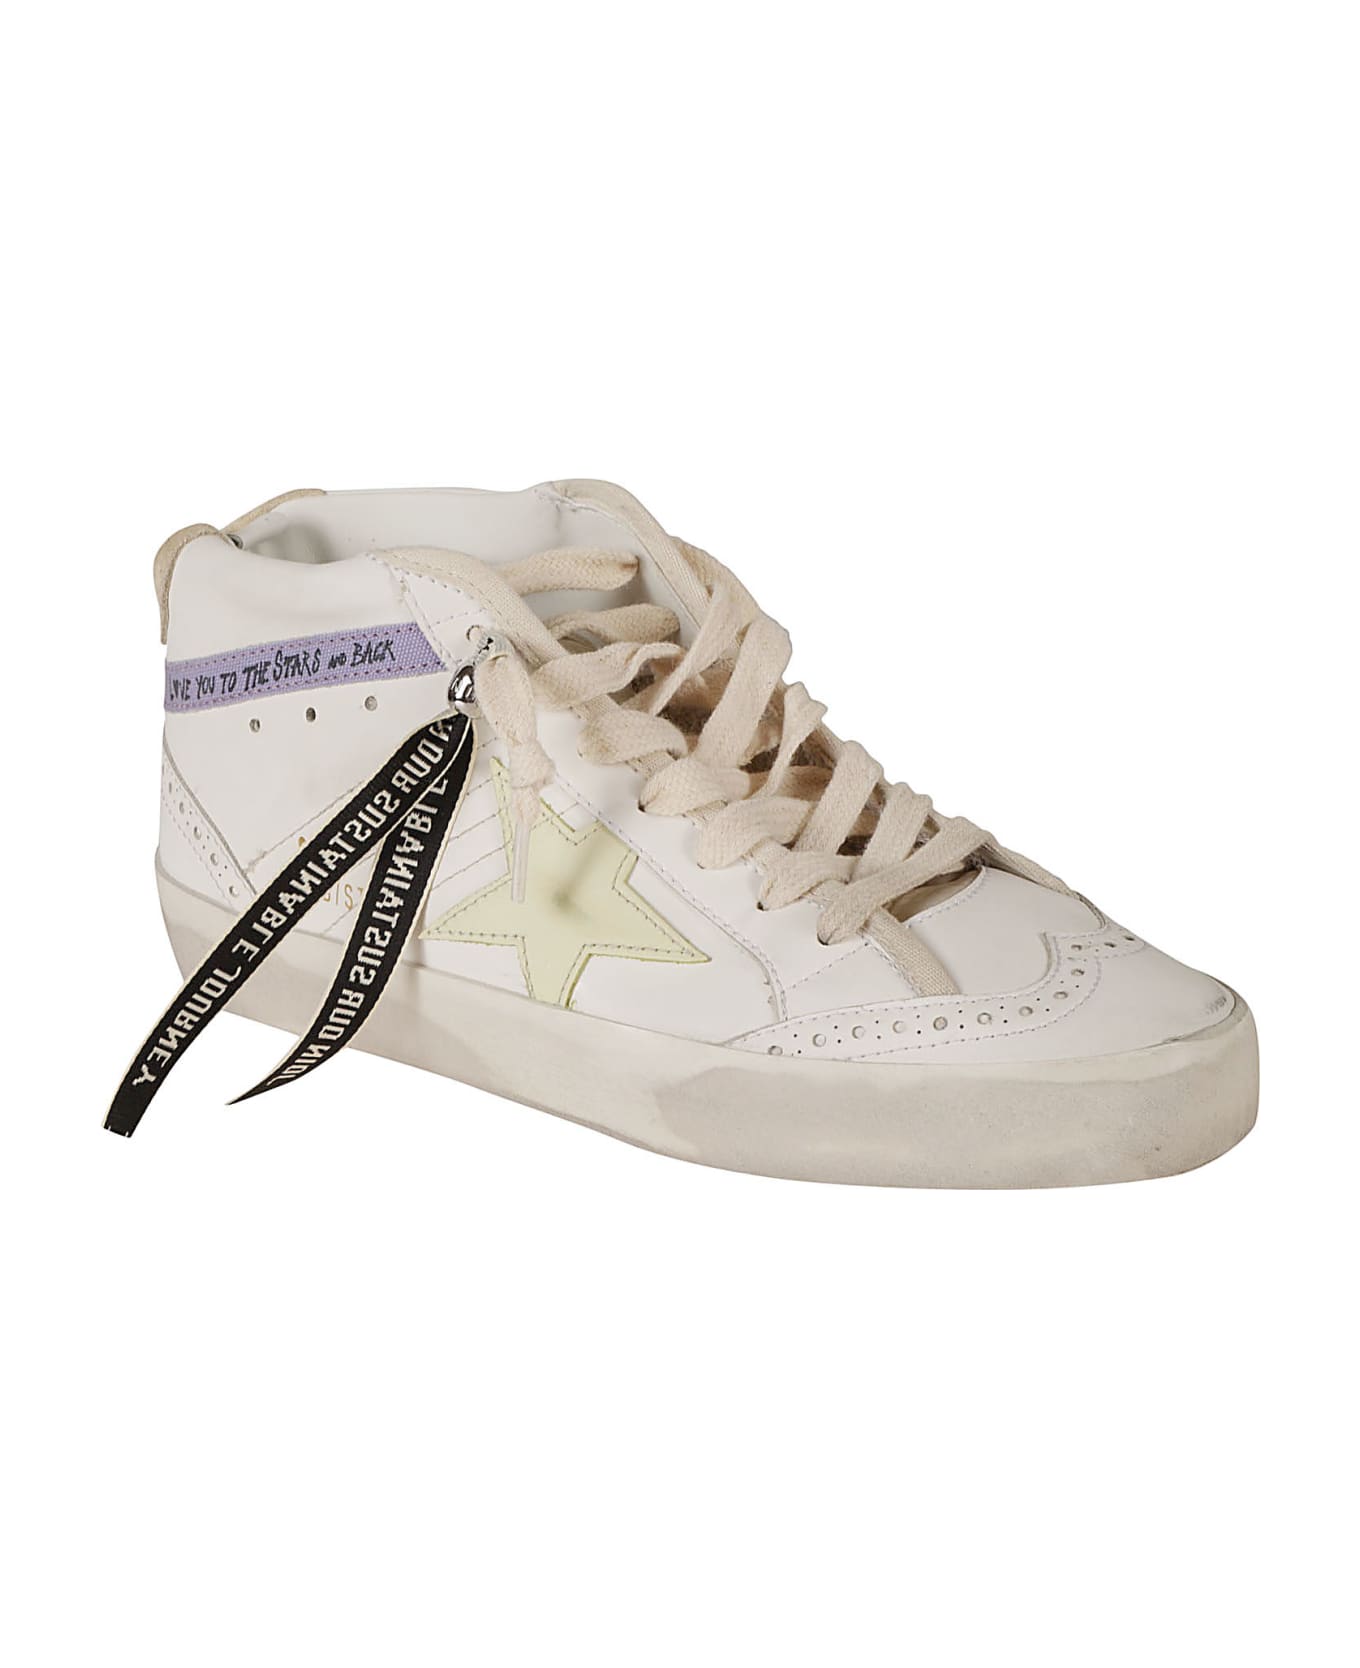 Golden Goose Mid Star Classic Sneakers - White/Beige/Light Yellow